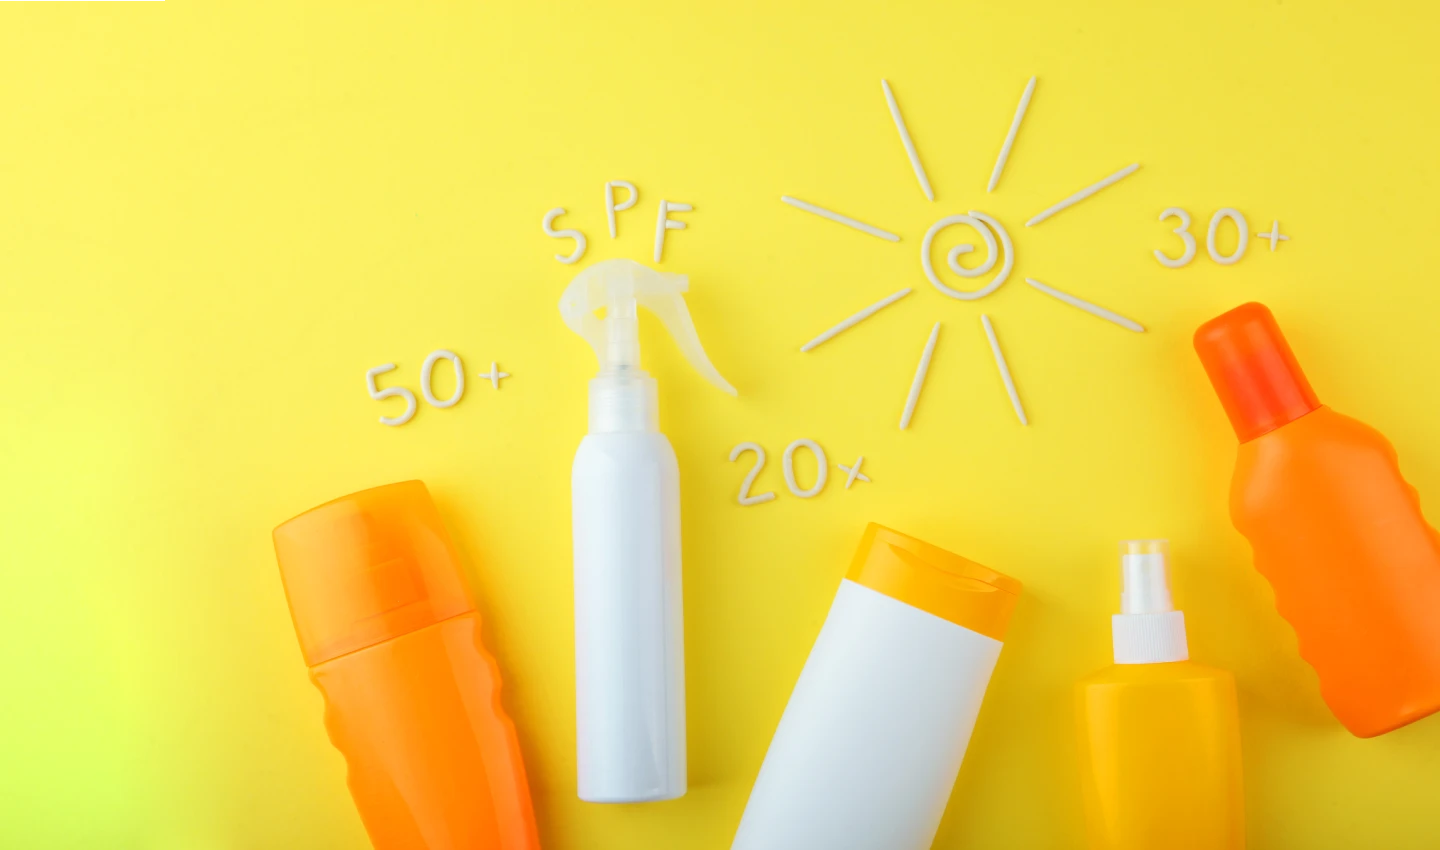 A group of different types of sunscreen displayed together, including lotions, sprays, and sticks, showcasing a range of SPF options to debunk common sunscreen myths.